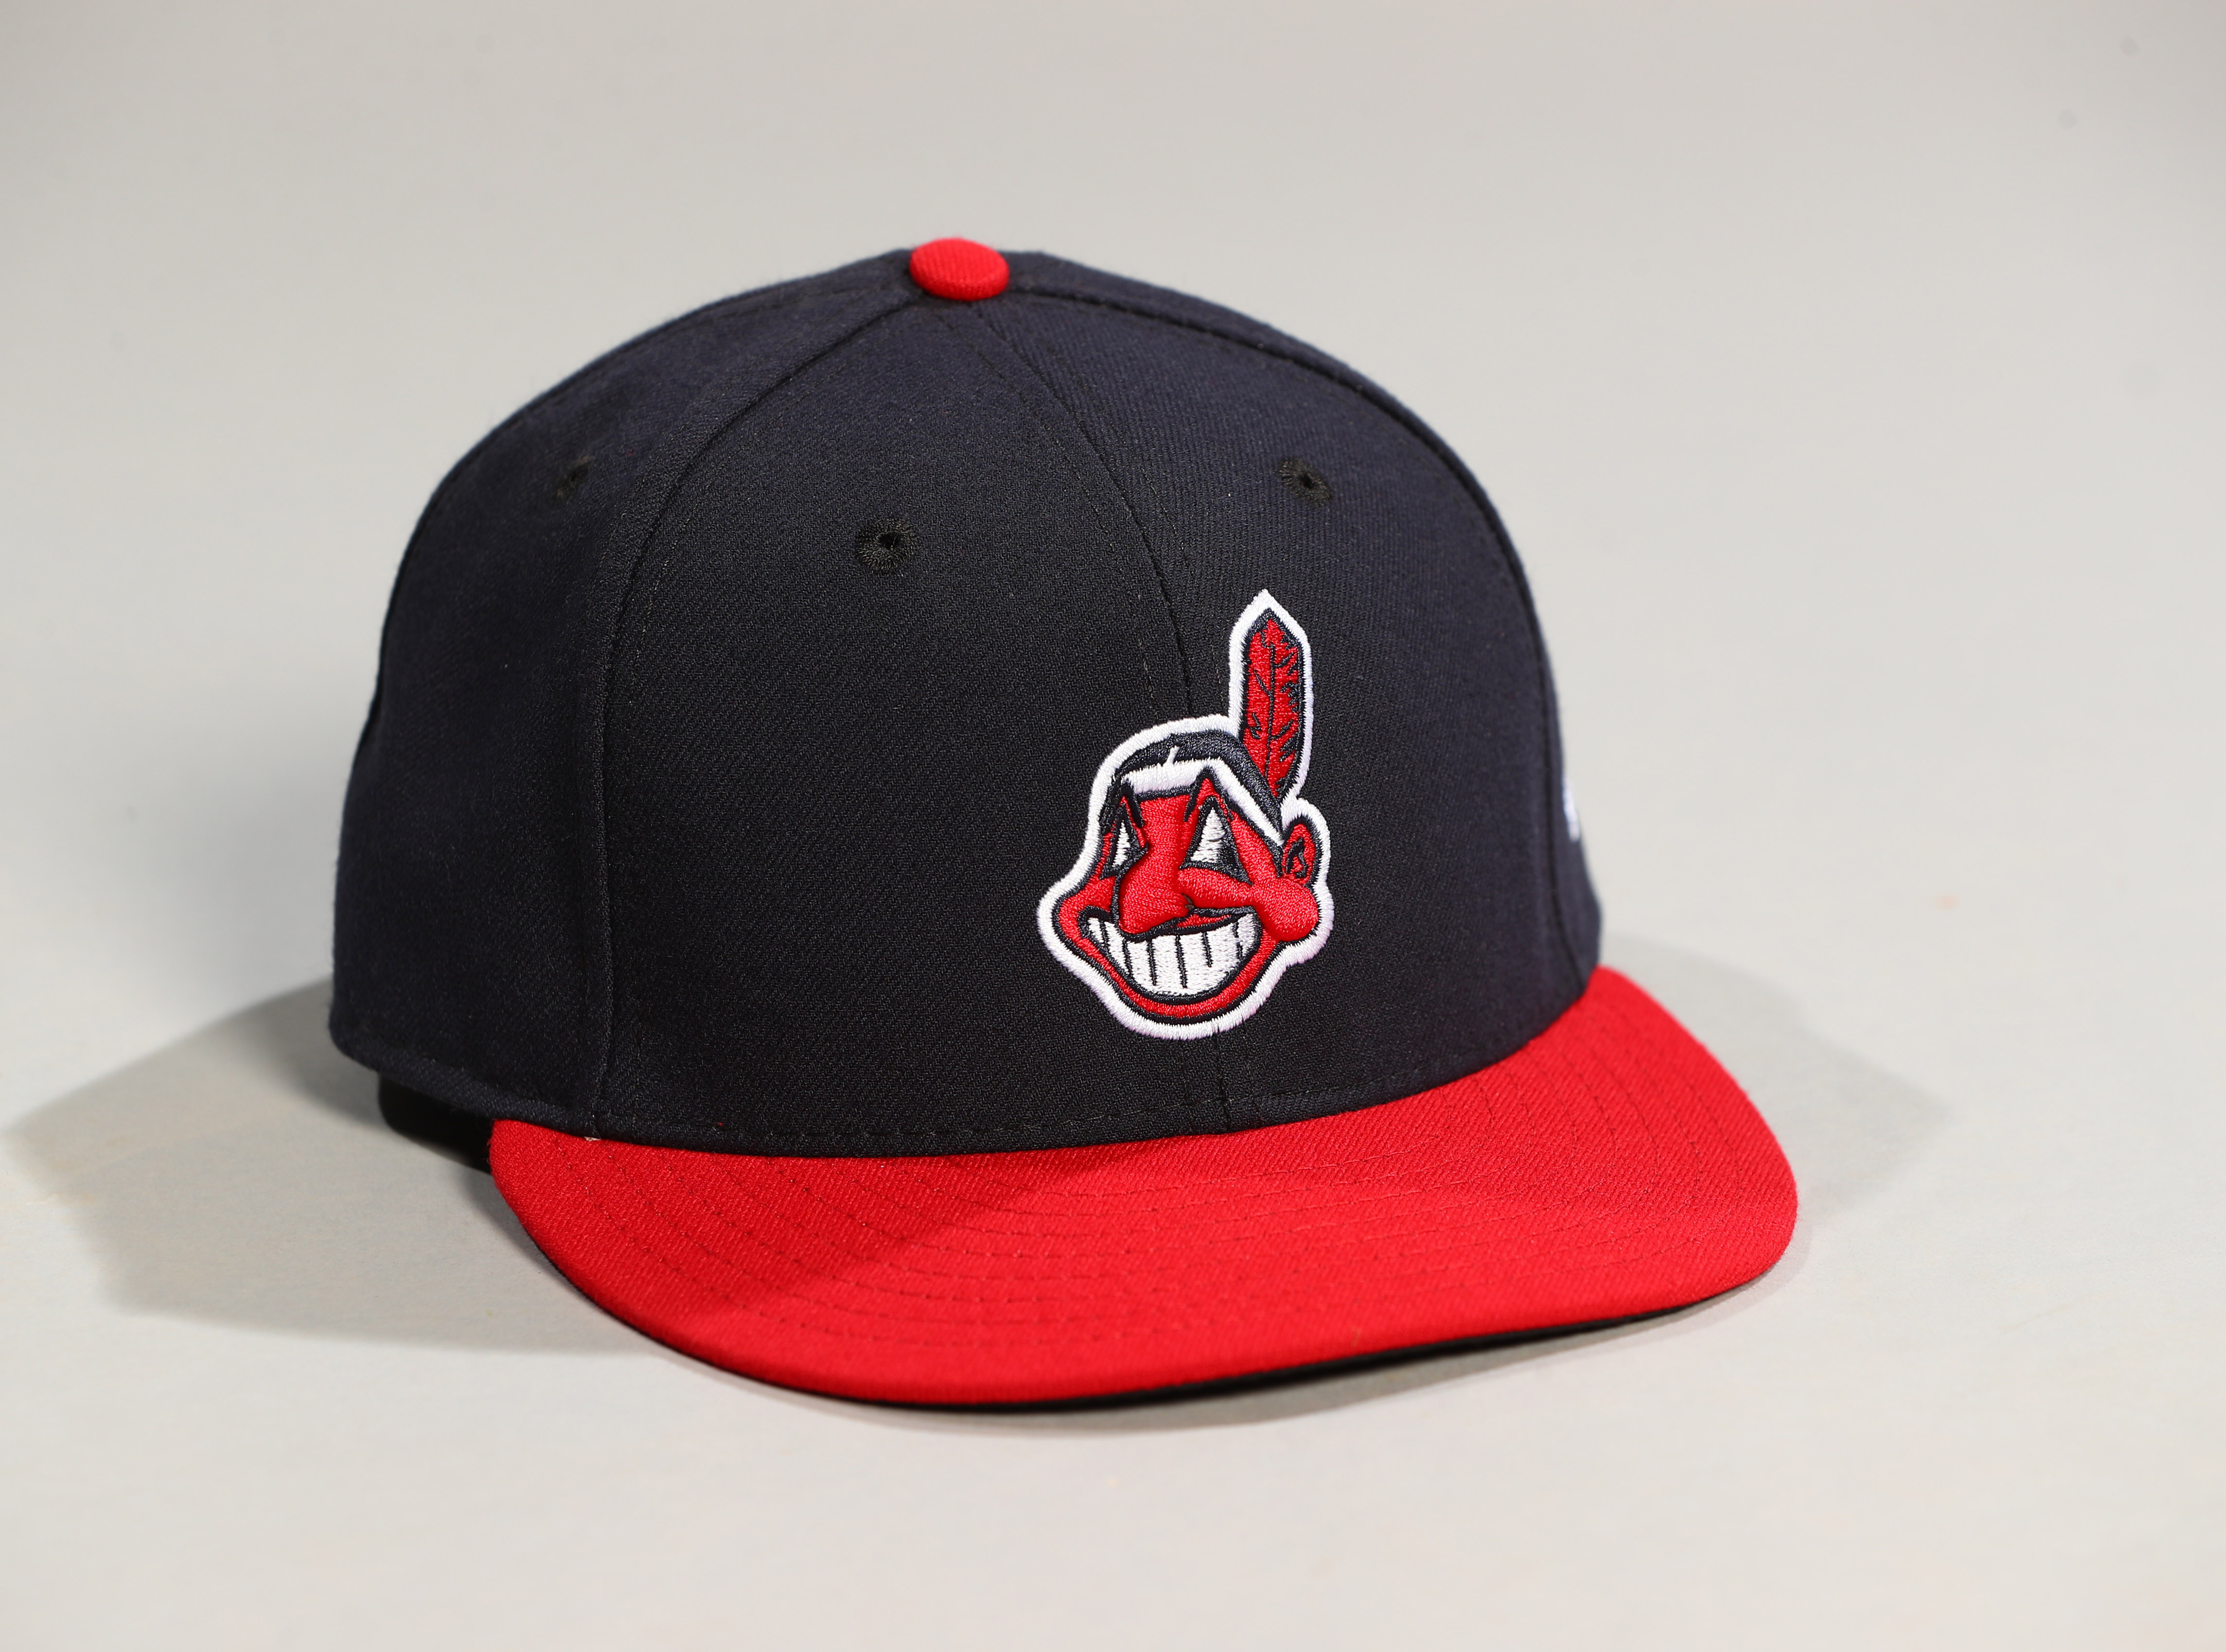 Indians removing Chief Wahoo logo from uniforms starting in 2019